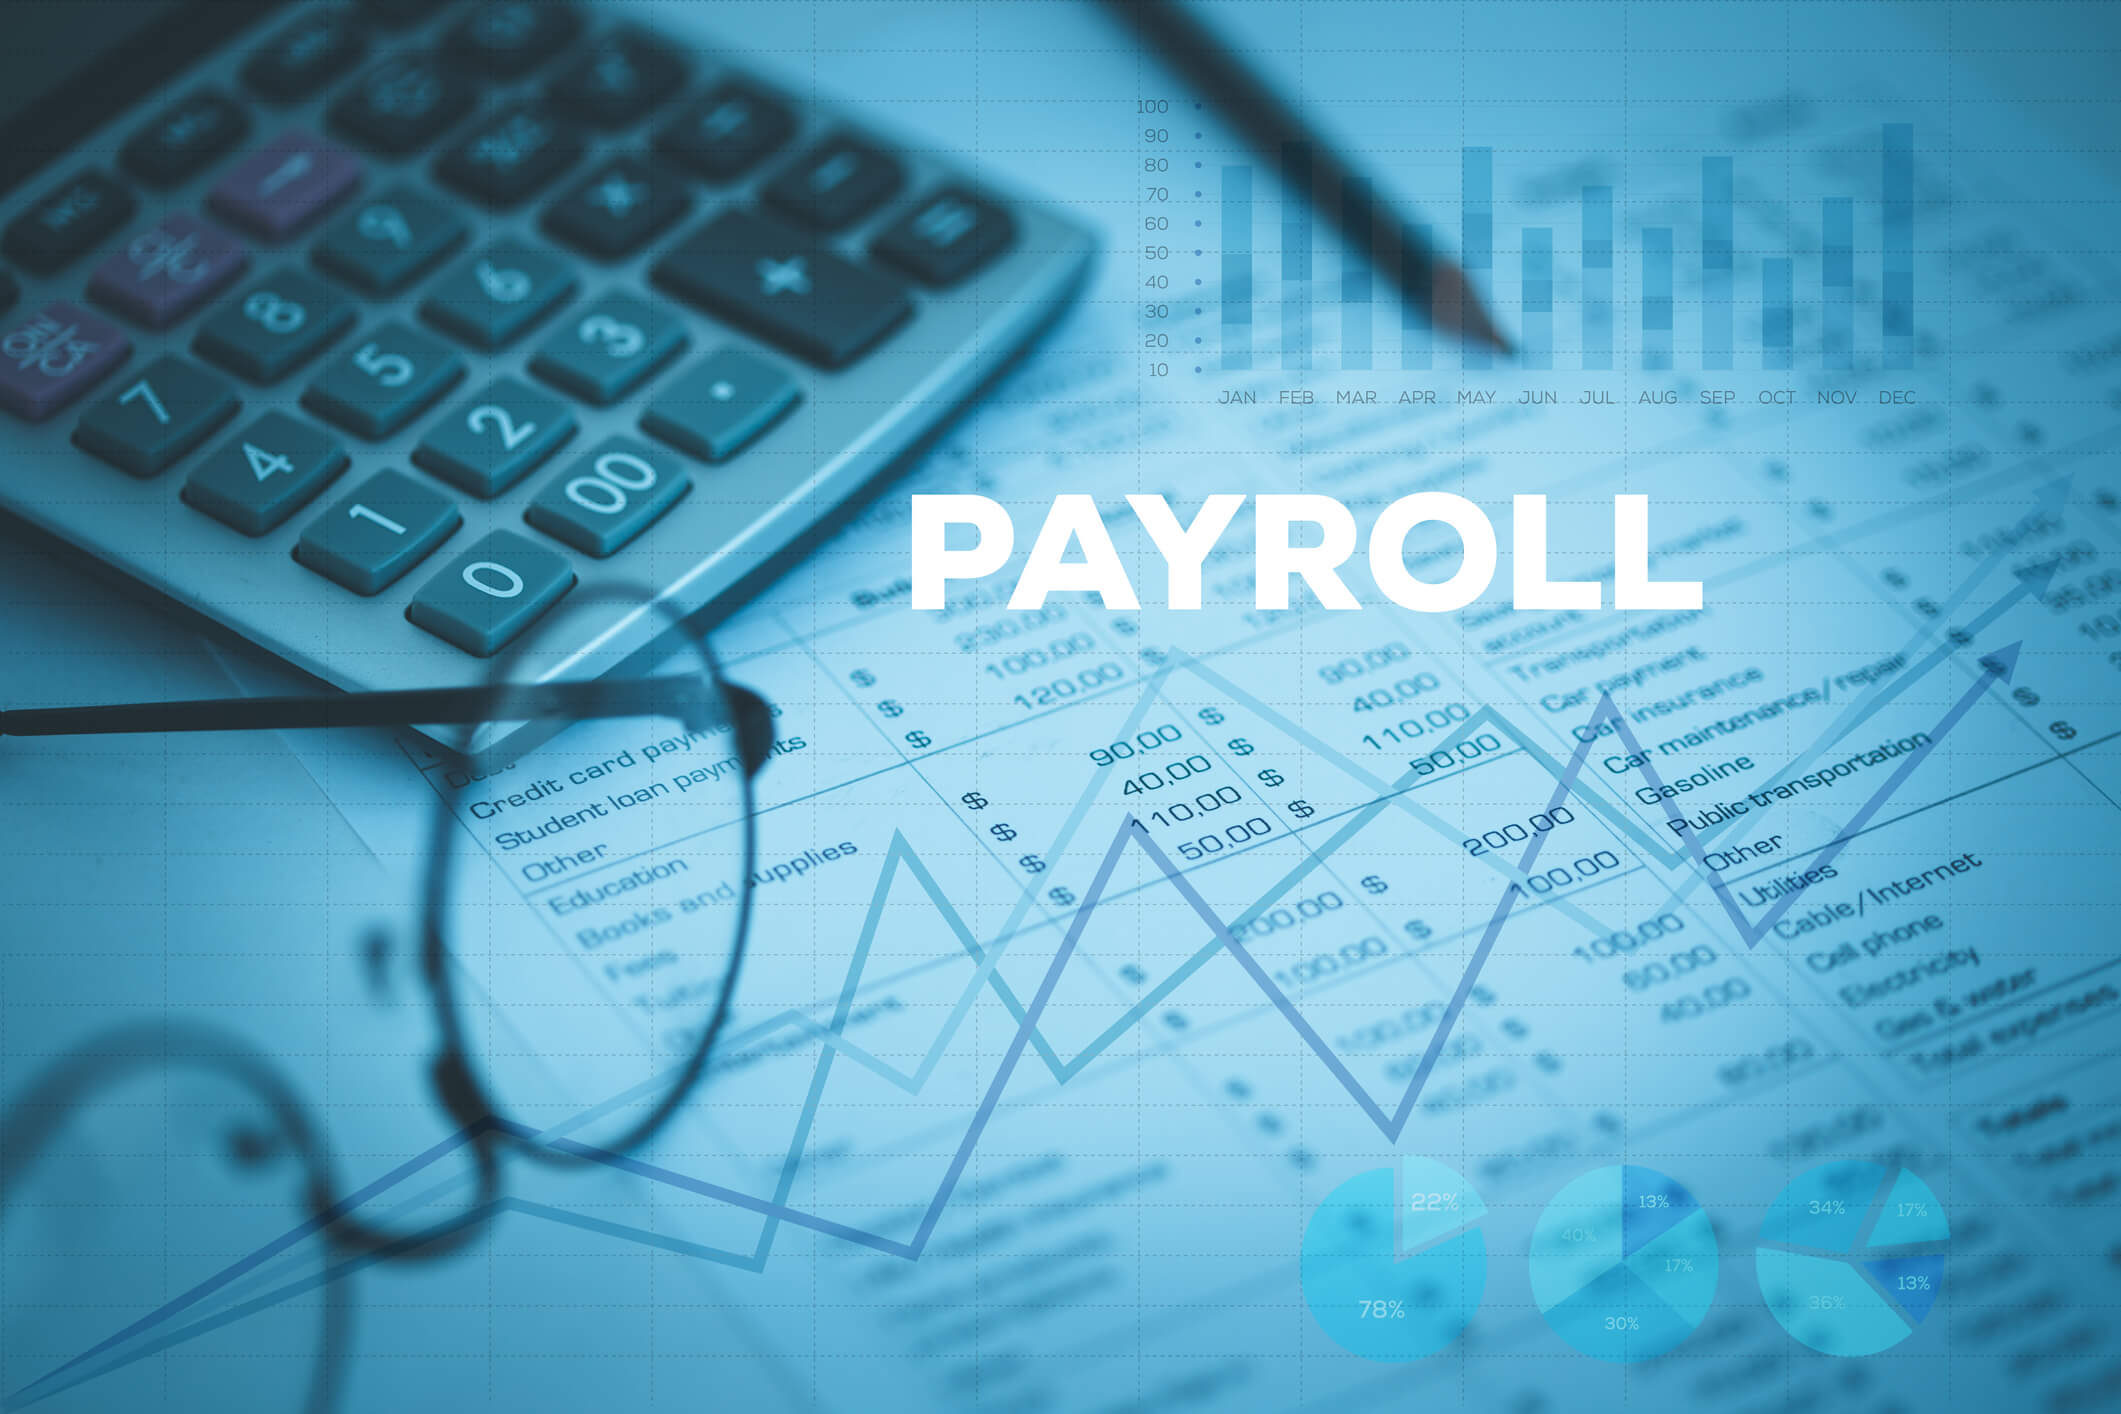 Payroll - Complete Controller